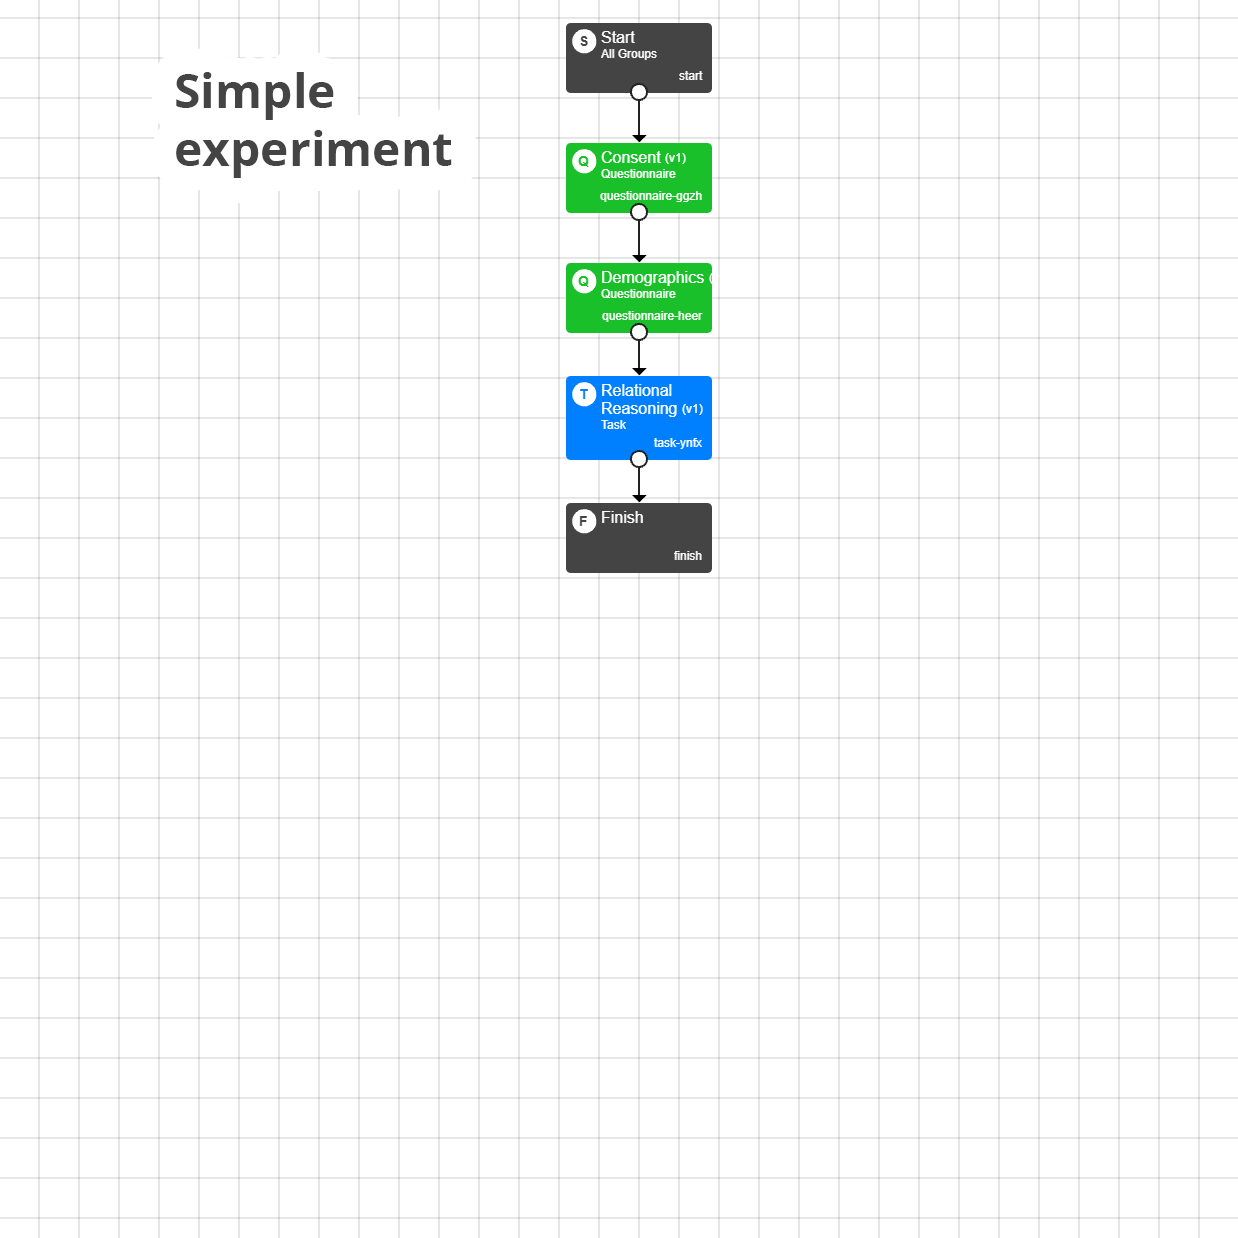 Gif of Experiment Builder showing wide range of experimental protocols